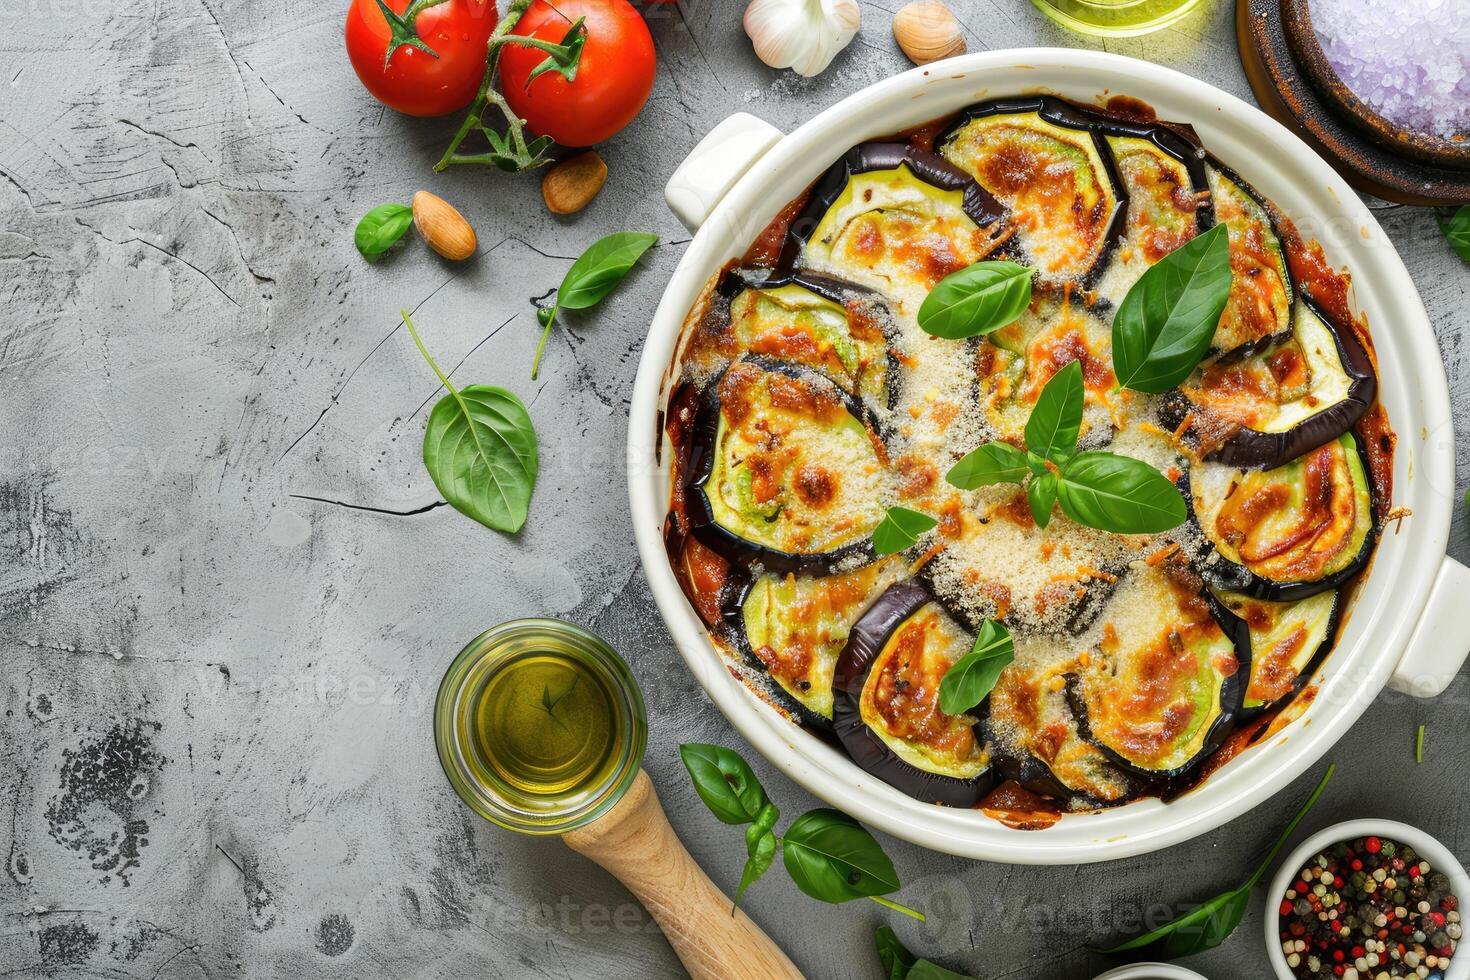 Eggplant casserole with cheese and tomato sauce in a white baking dish on a gray background with ingredients for cooking. Vegetarian healthy food photo